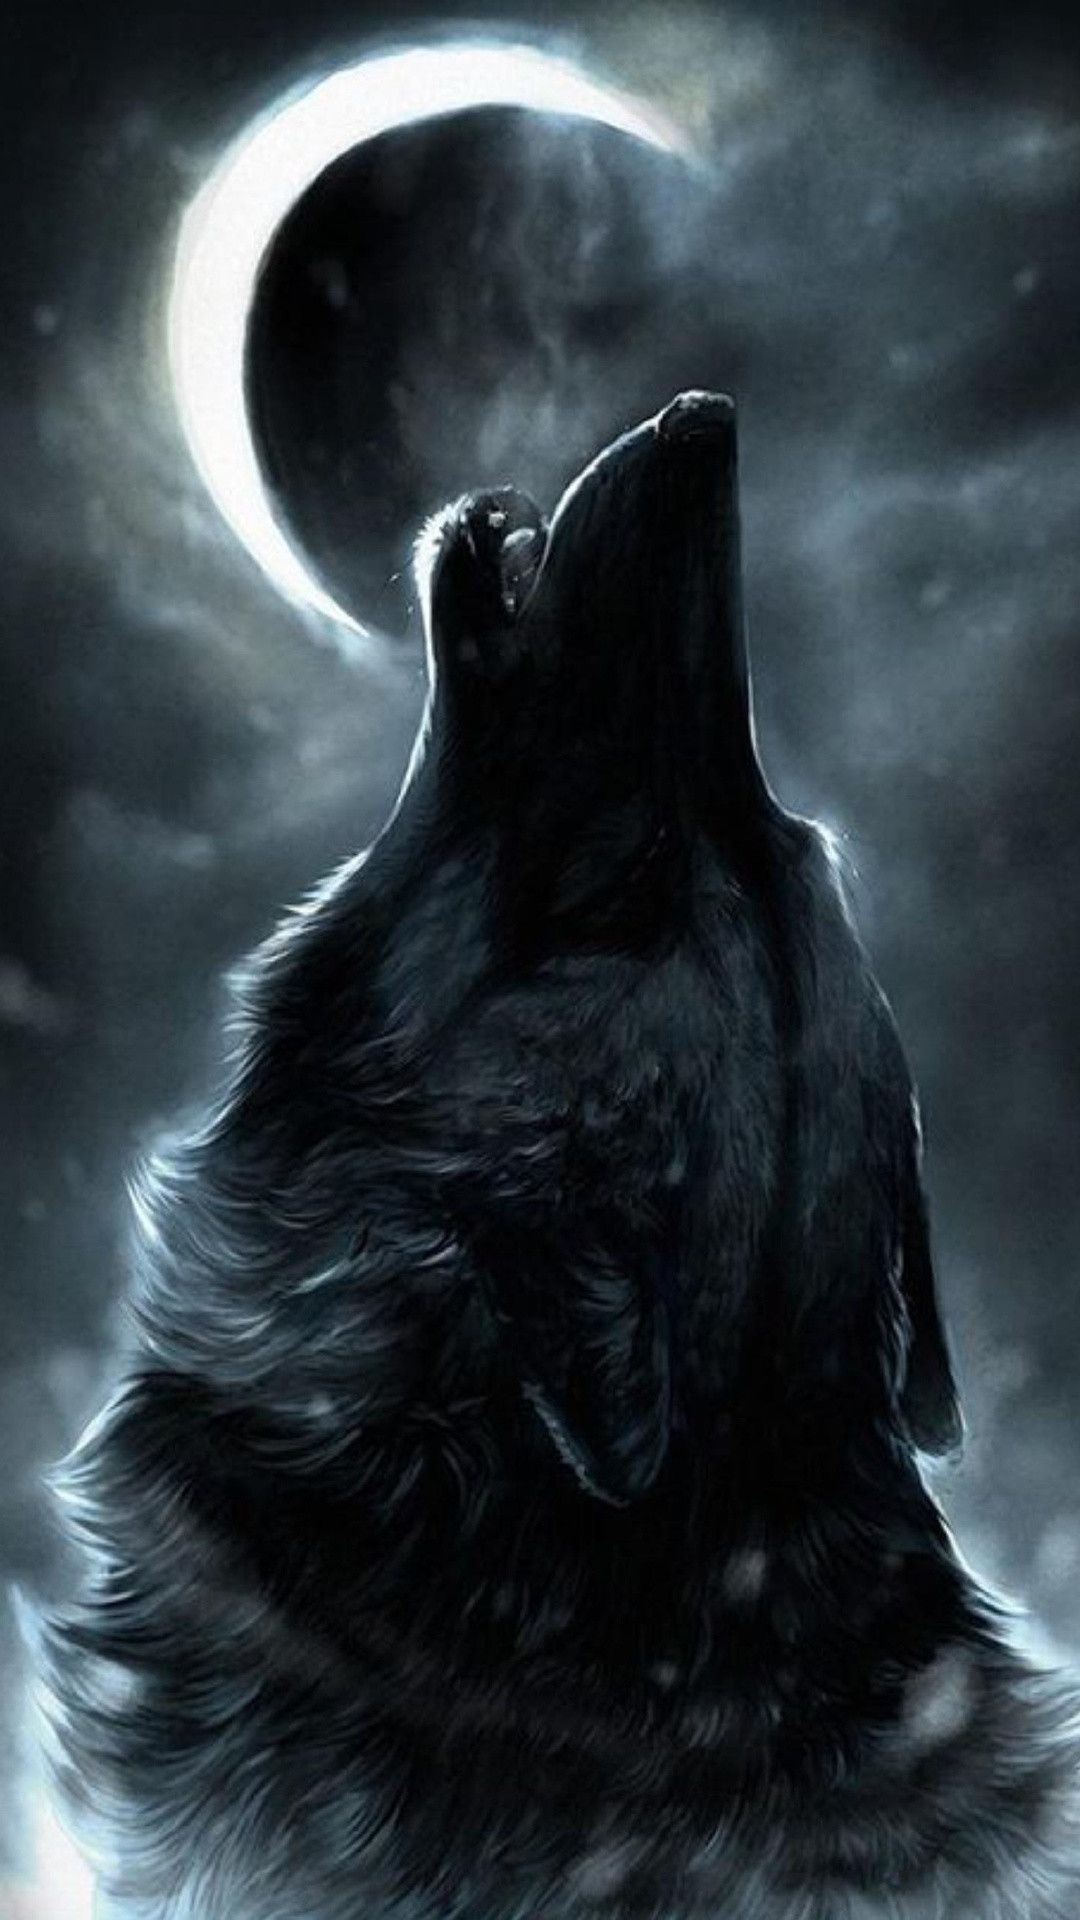 Epic Wolf Wallpaper Full HD Hupages Download iPhone Wallpaper. Wolf wallpaper, Wolf painting, Wolf spirit